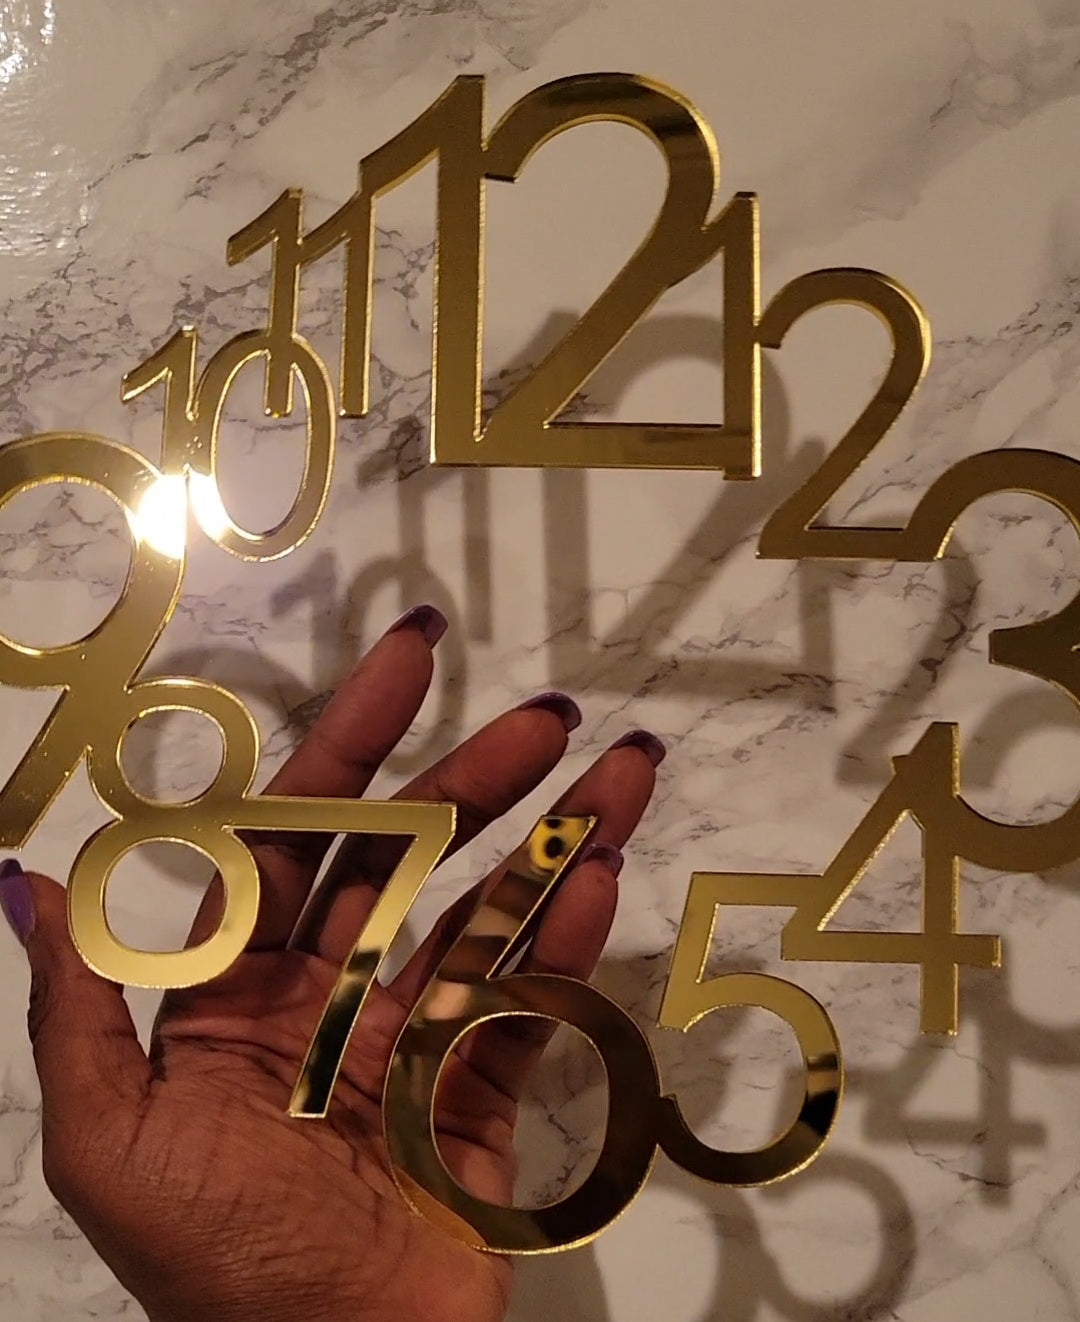 mirror gold clock face numbers 1-12